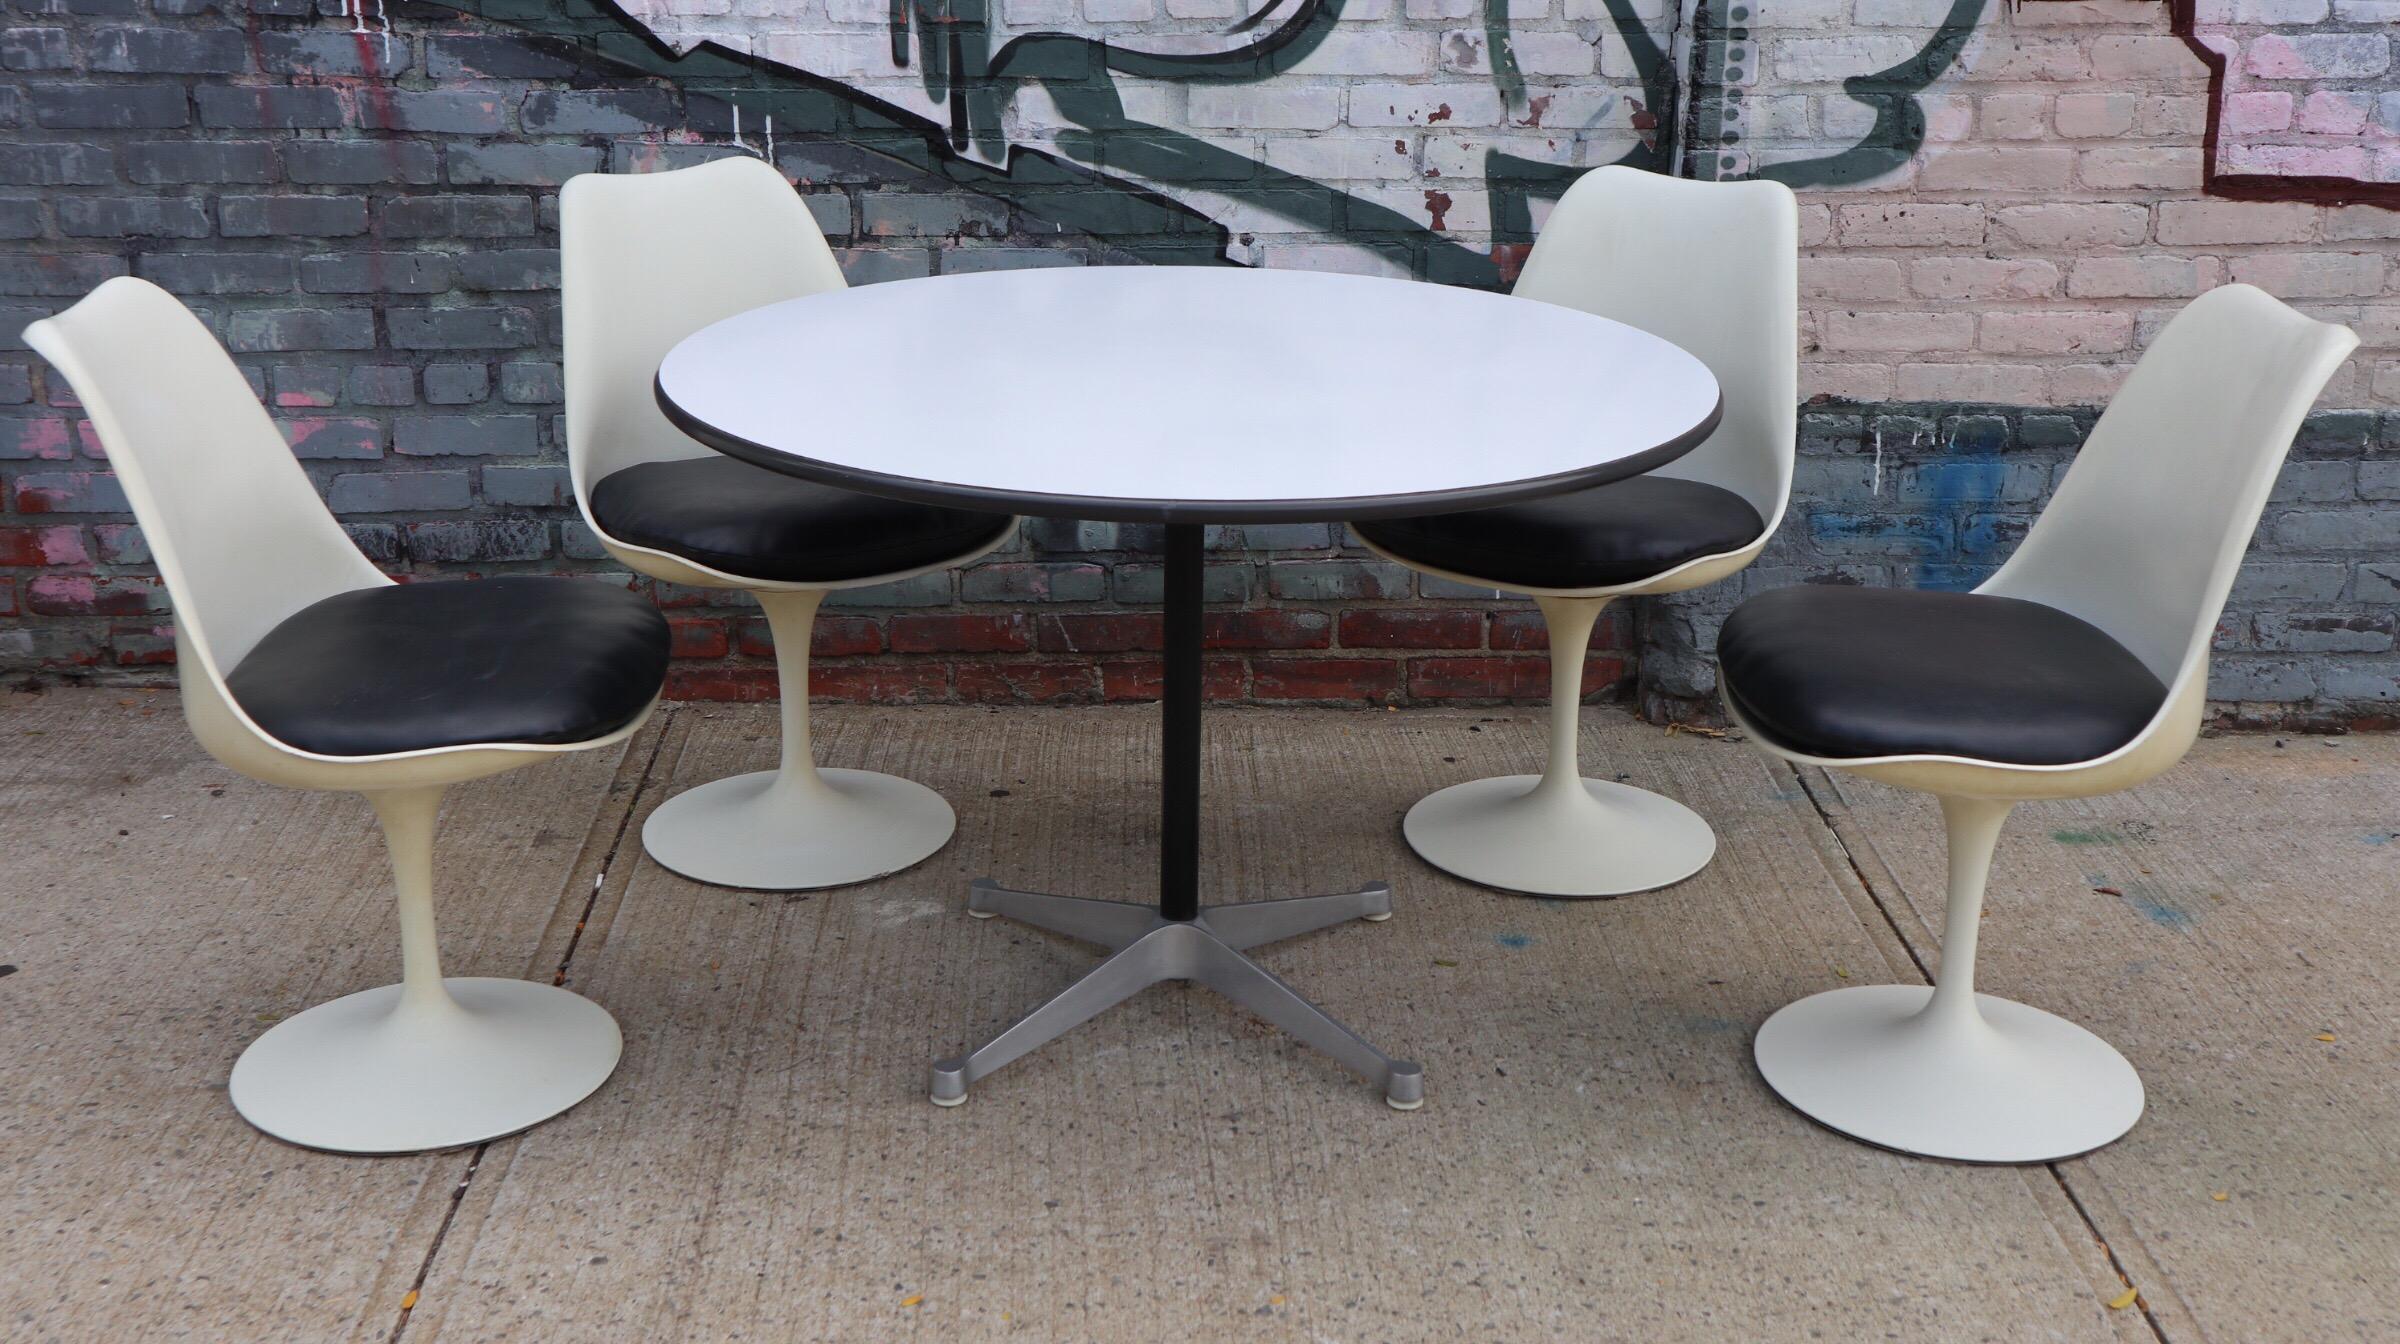 Dining set consisting of table and 4 tulip chairs by the iconic American designers Charles and Ray Eames and Eero Saarinen. The table has a top of white laminate in very good shape on aluminum four pronged base. Base retains all 4 glides and Herman